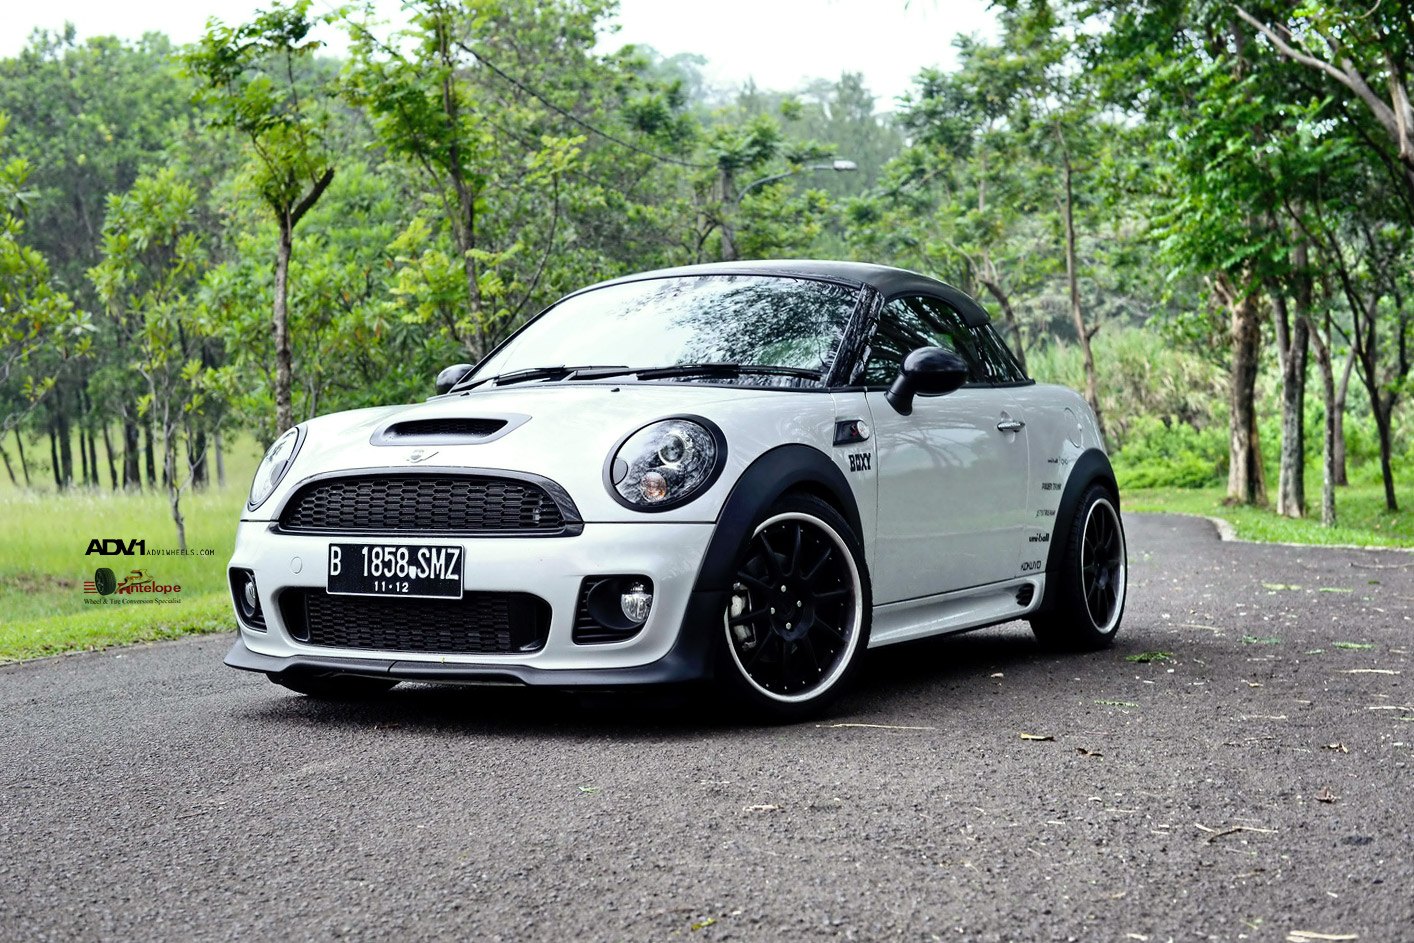 White Debadged Mini Cooper with Black Accents - Photo by ADV.1